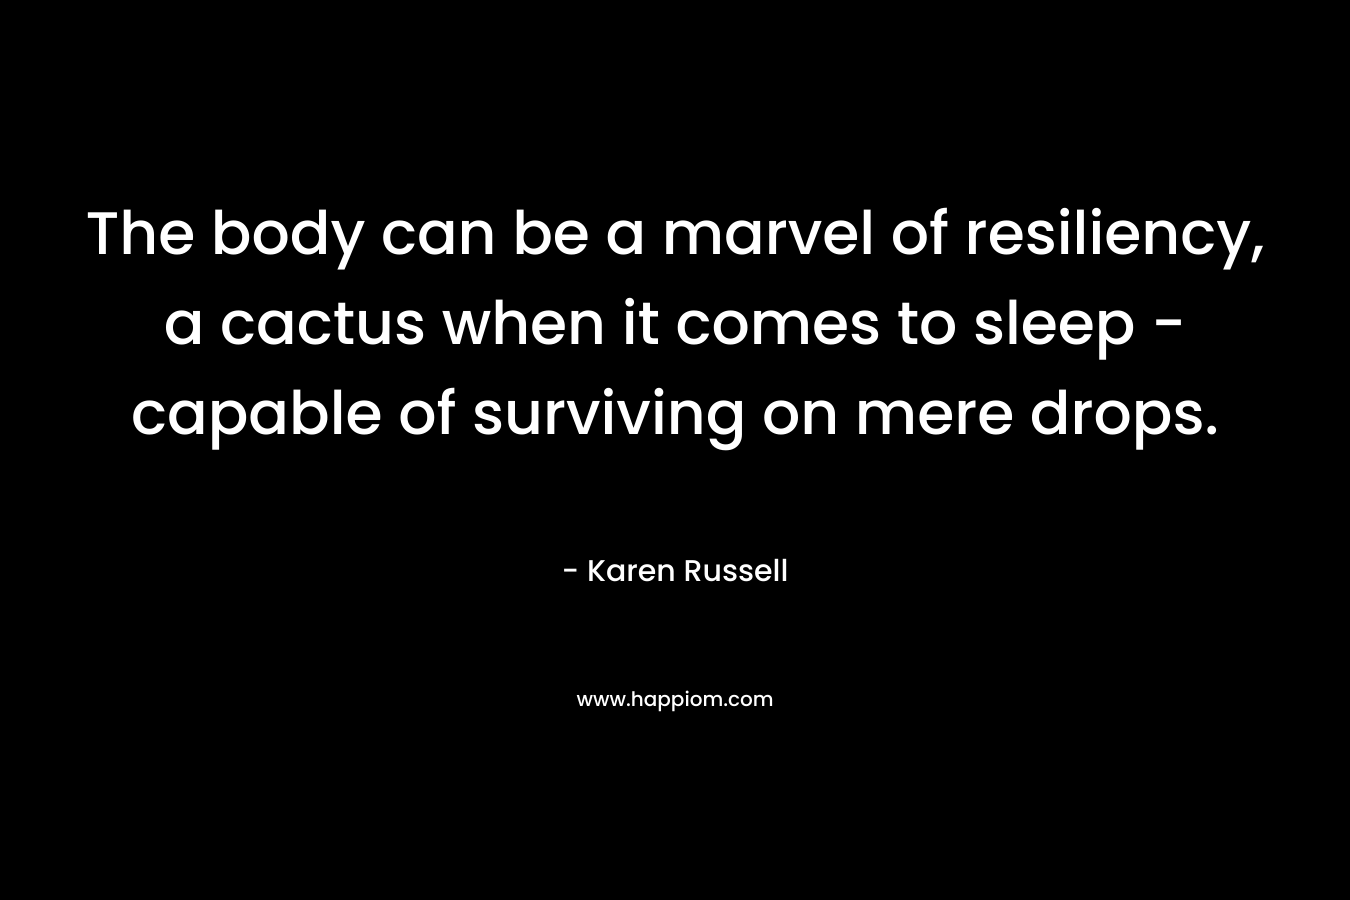 The body can be a marvel of resiliency, a cactus when it comes to sleep – capable of surviving on mere drops. – Karen Russell